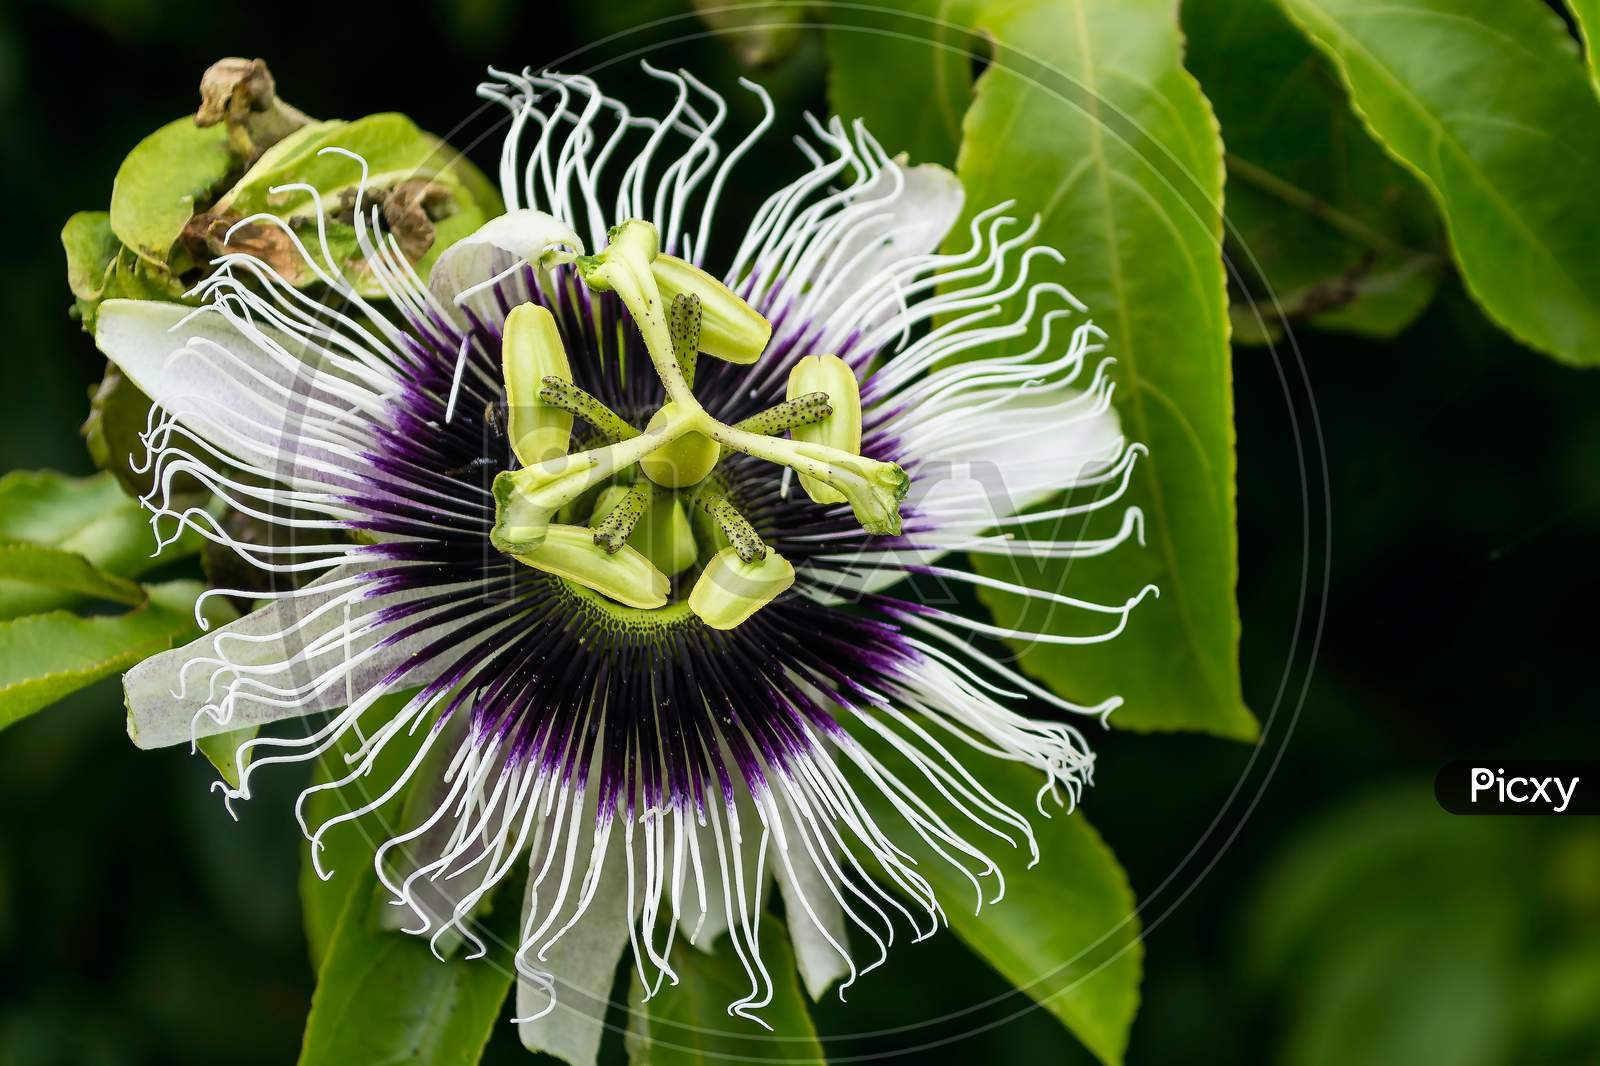 Perfect close up of a passion fruit flower with green leafs background.